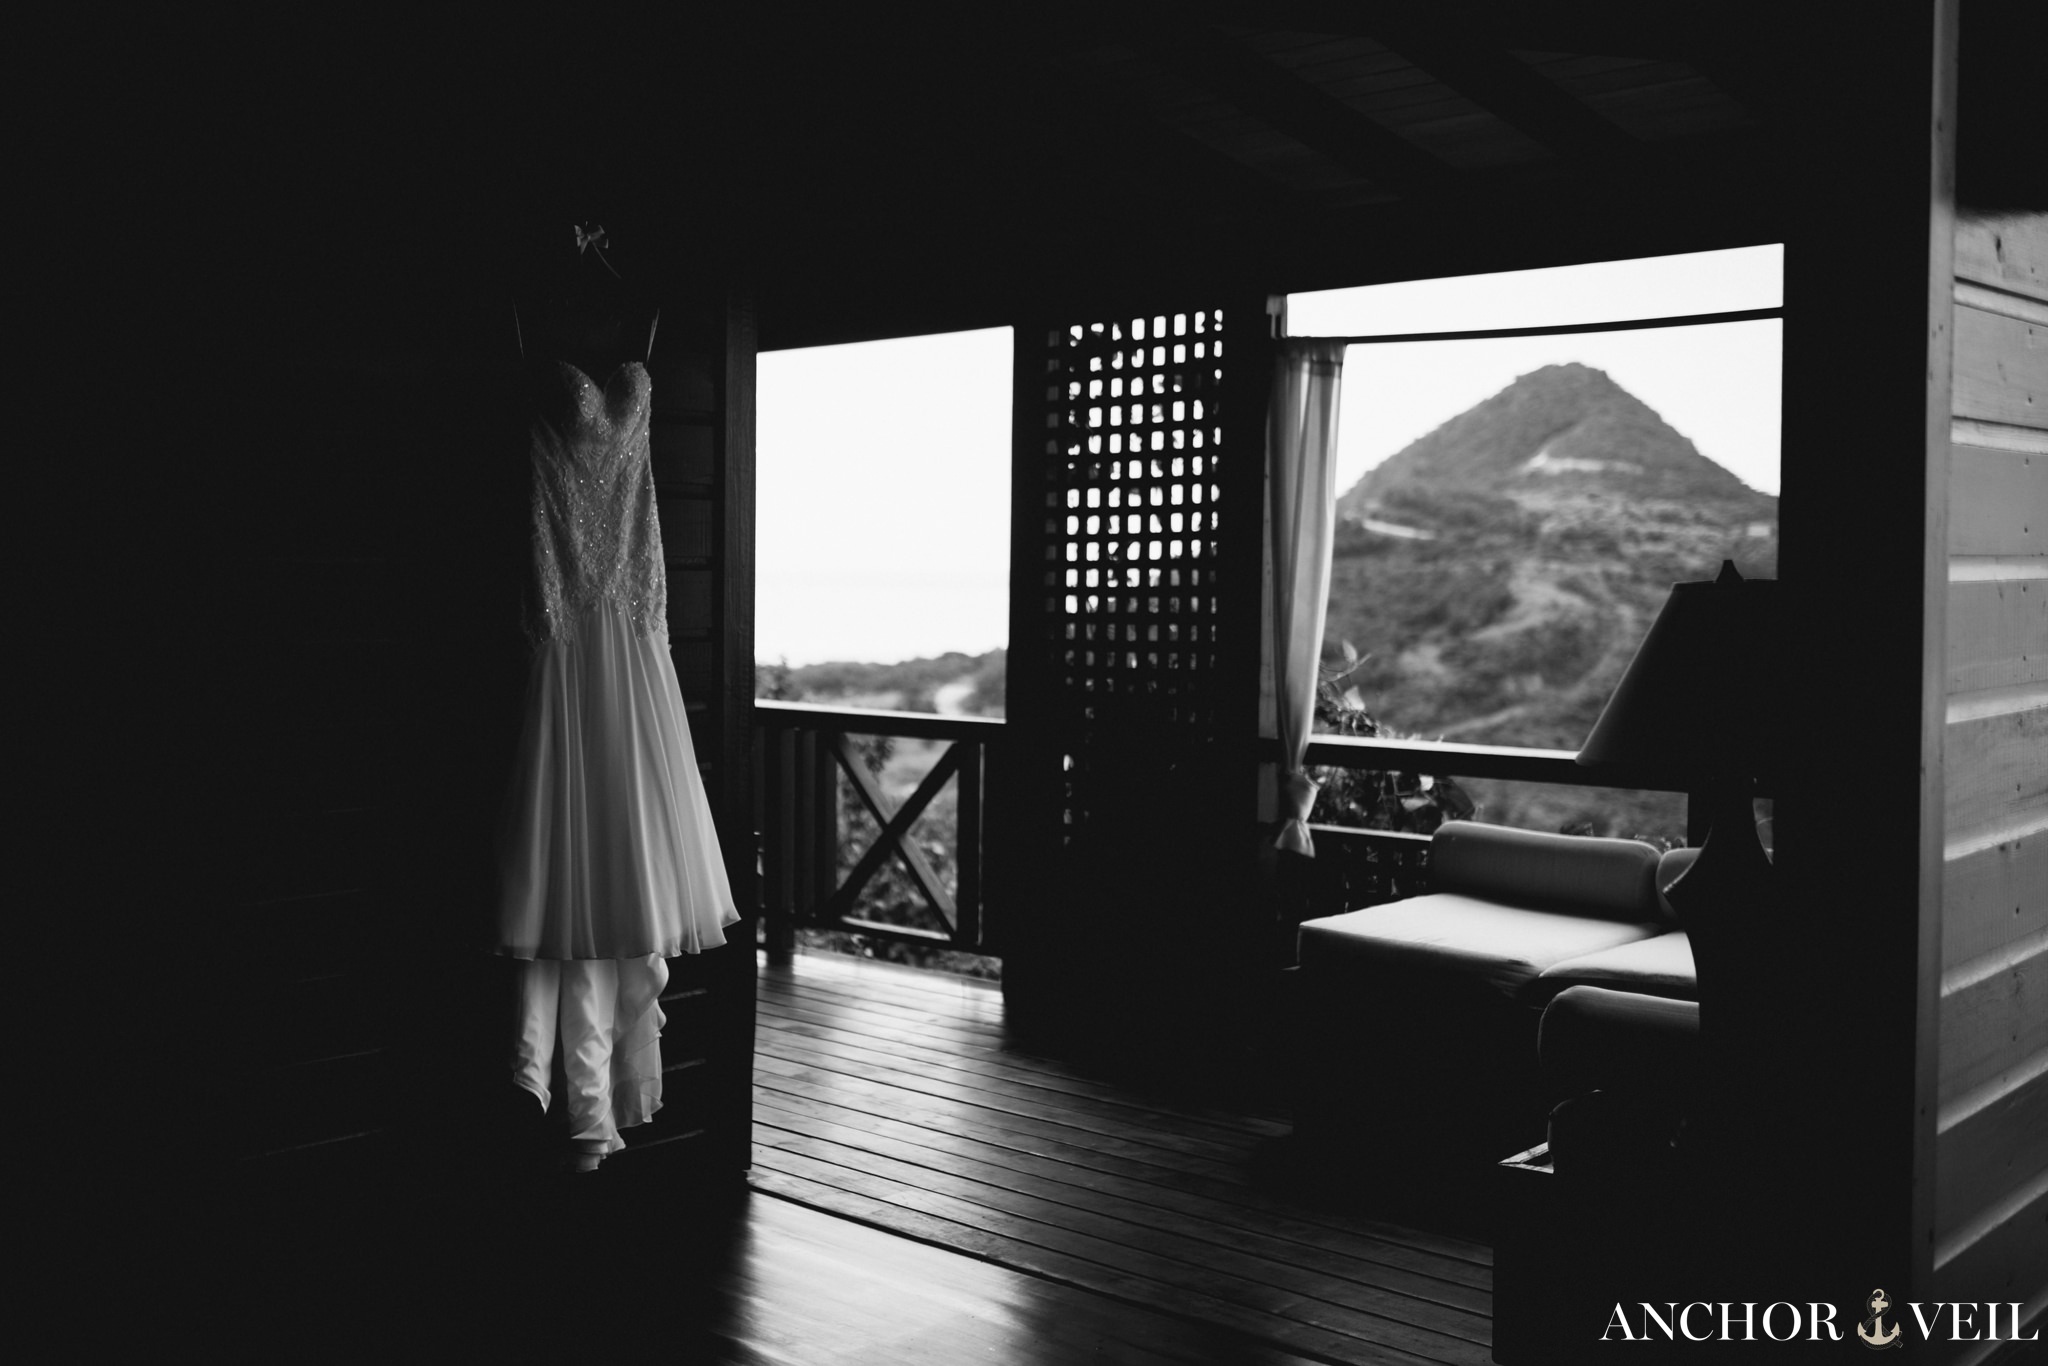 the dress hanging up with the mountains in the background